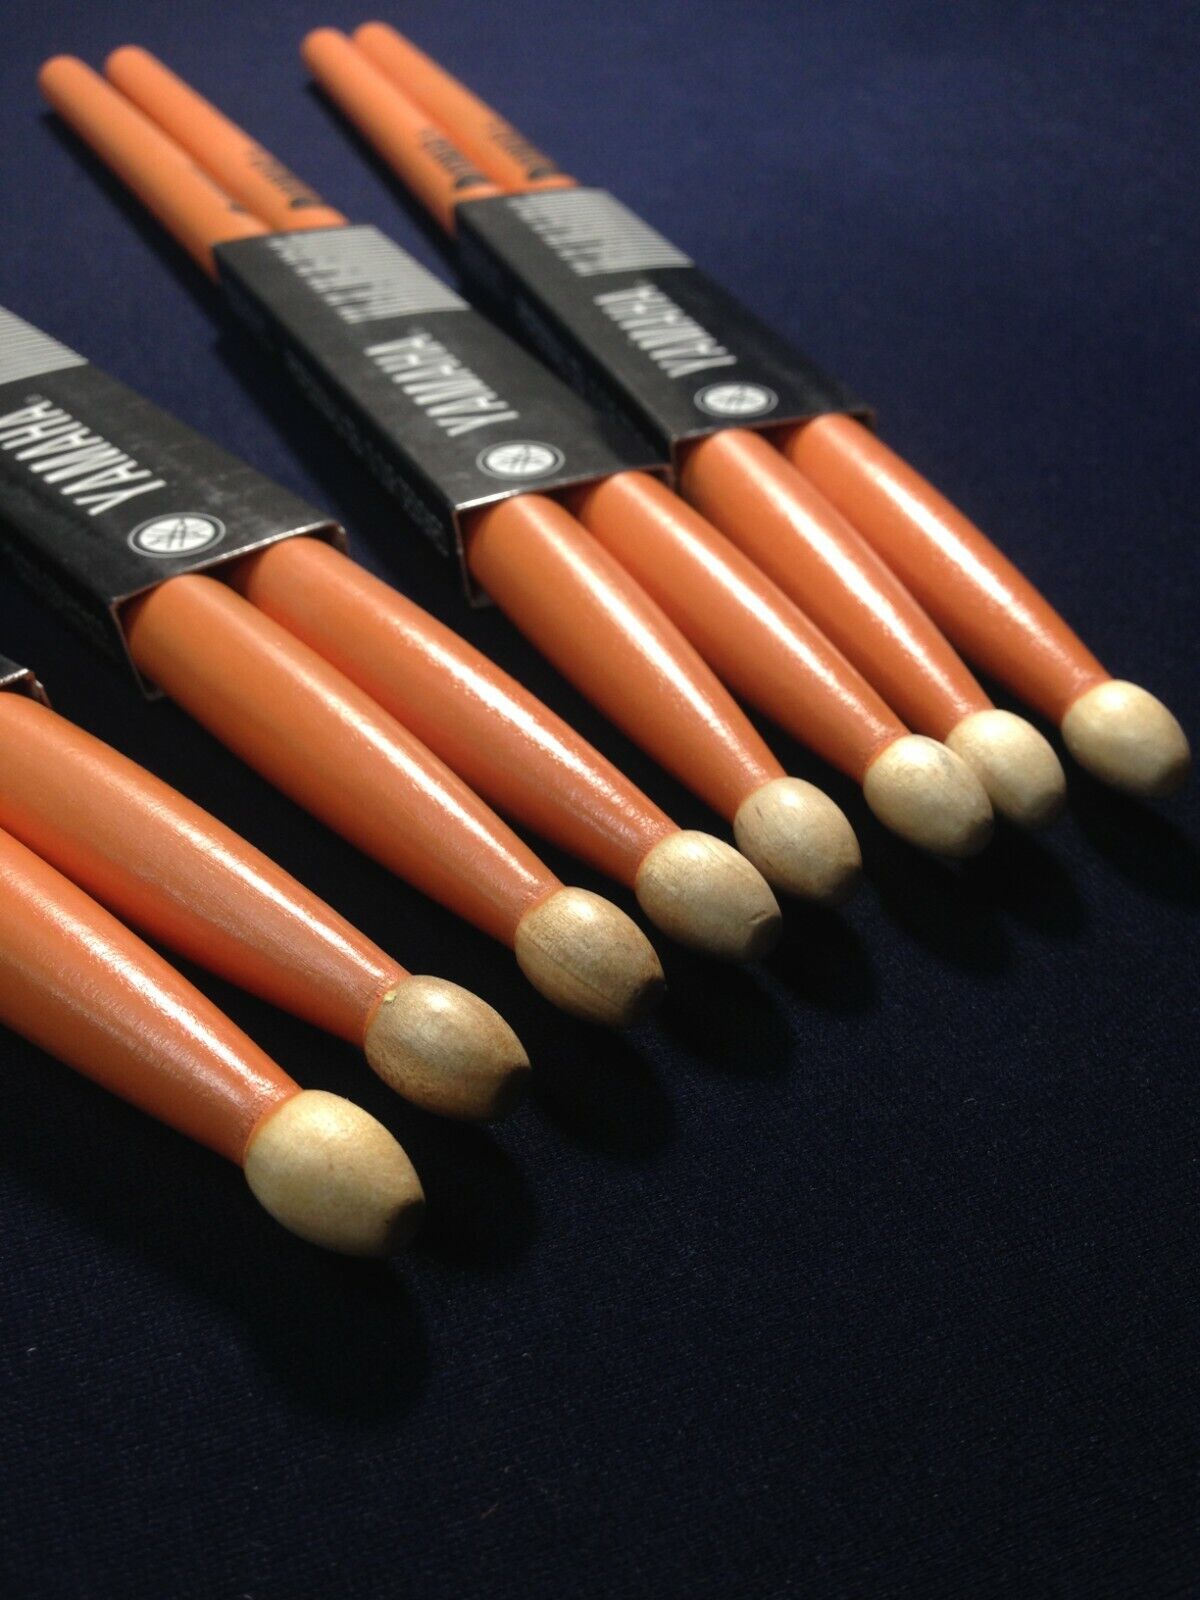 Premium Yamaha 5A Drum Sticks, All Maple Wood, Fits for All Drums - Orange